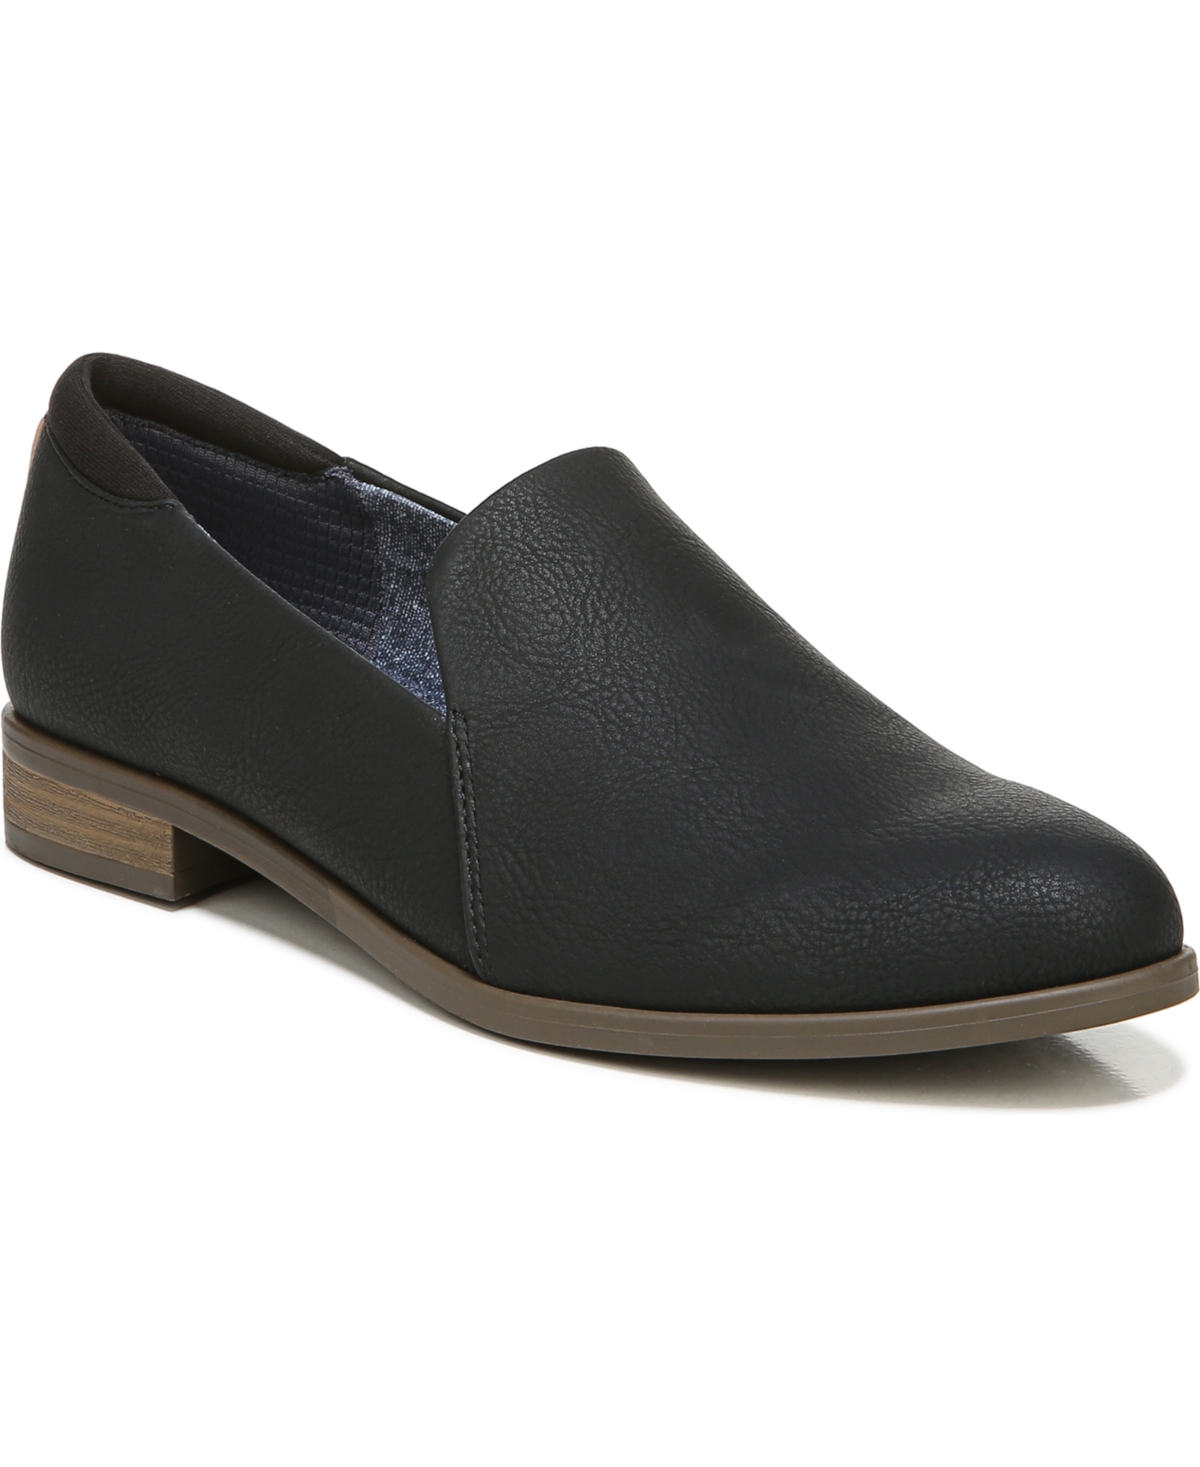 UPC 093627135941 product image for Dr. Scholl's Women's Rate Loafer Slip-ons Women's Shoes | upcitemdb.com